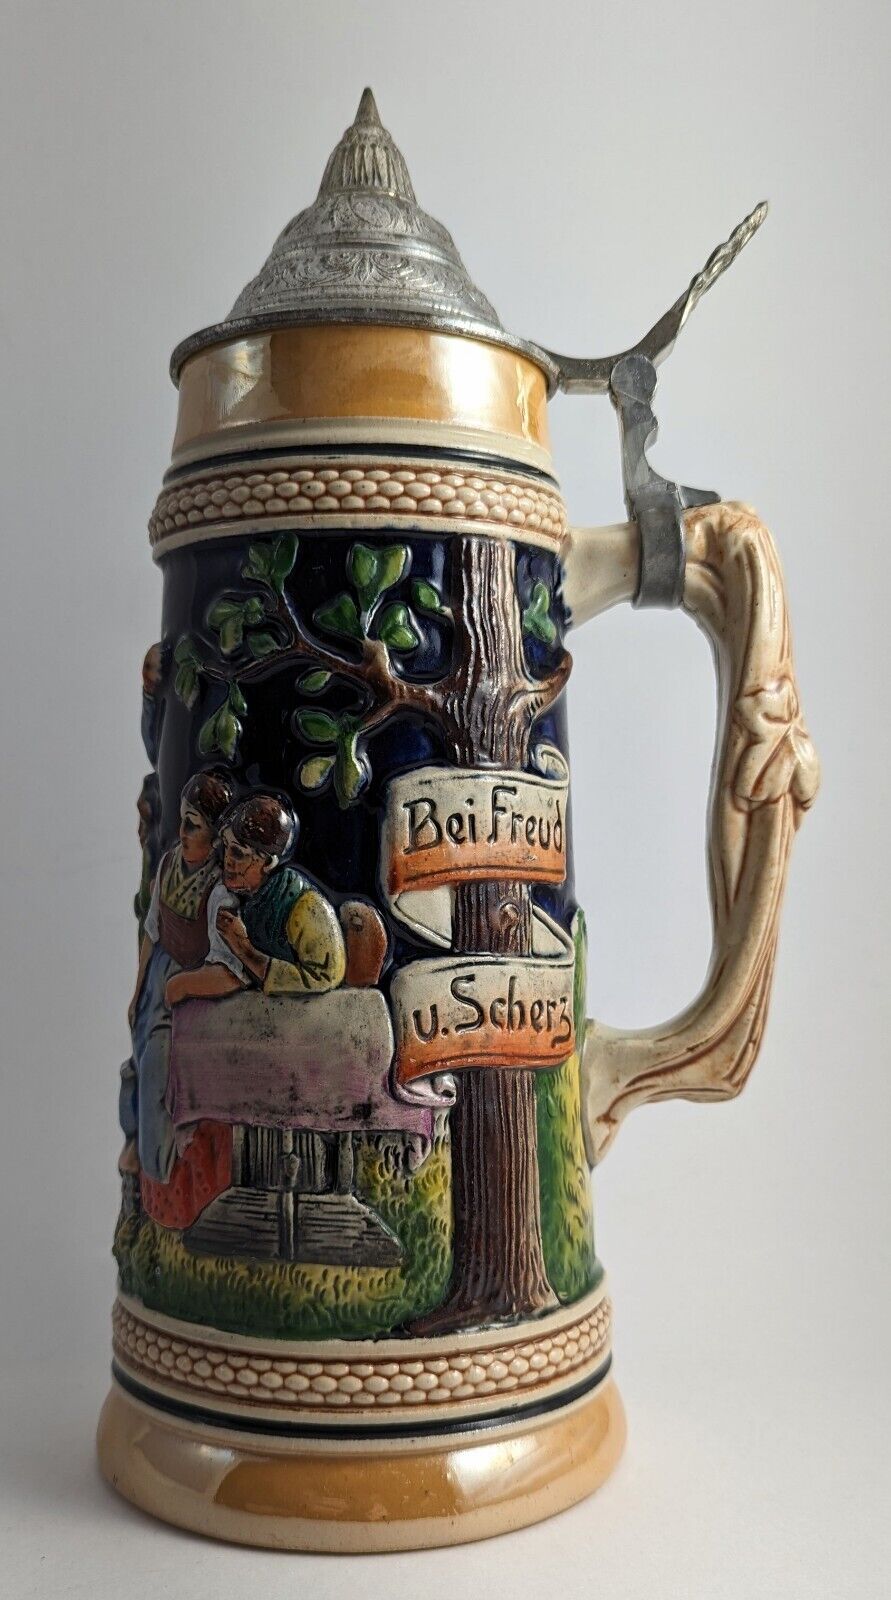 Antique large German Beer Stein; made in West Germany; beautiful craftsmanship